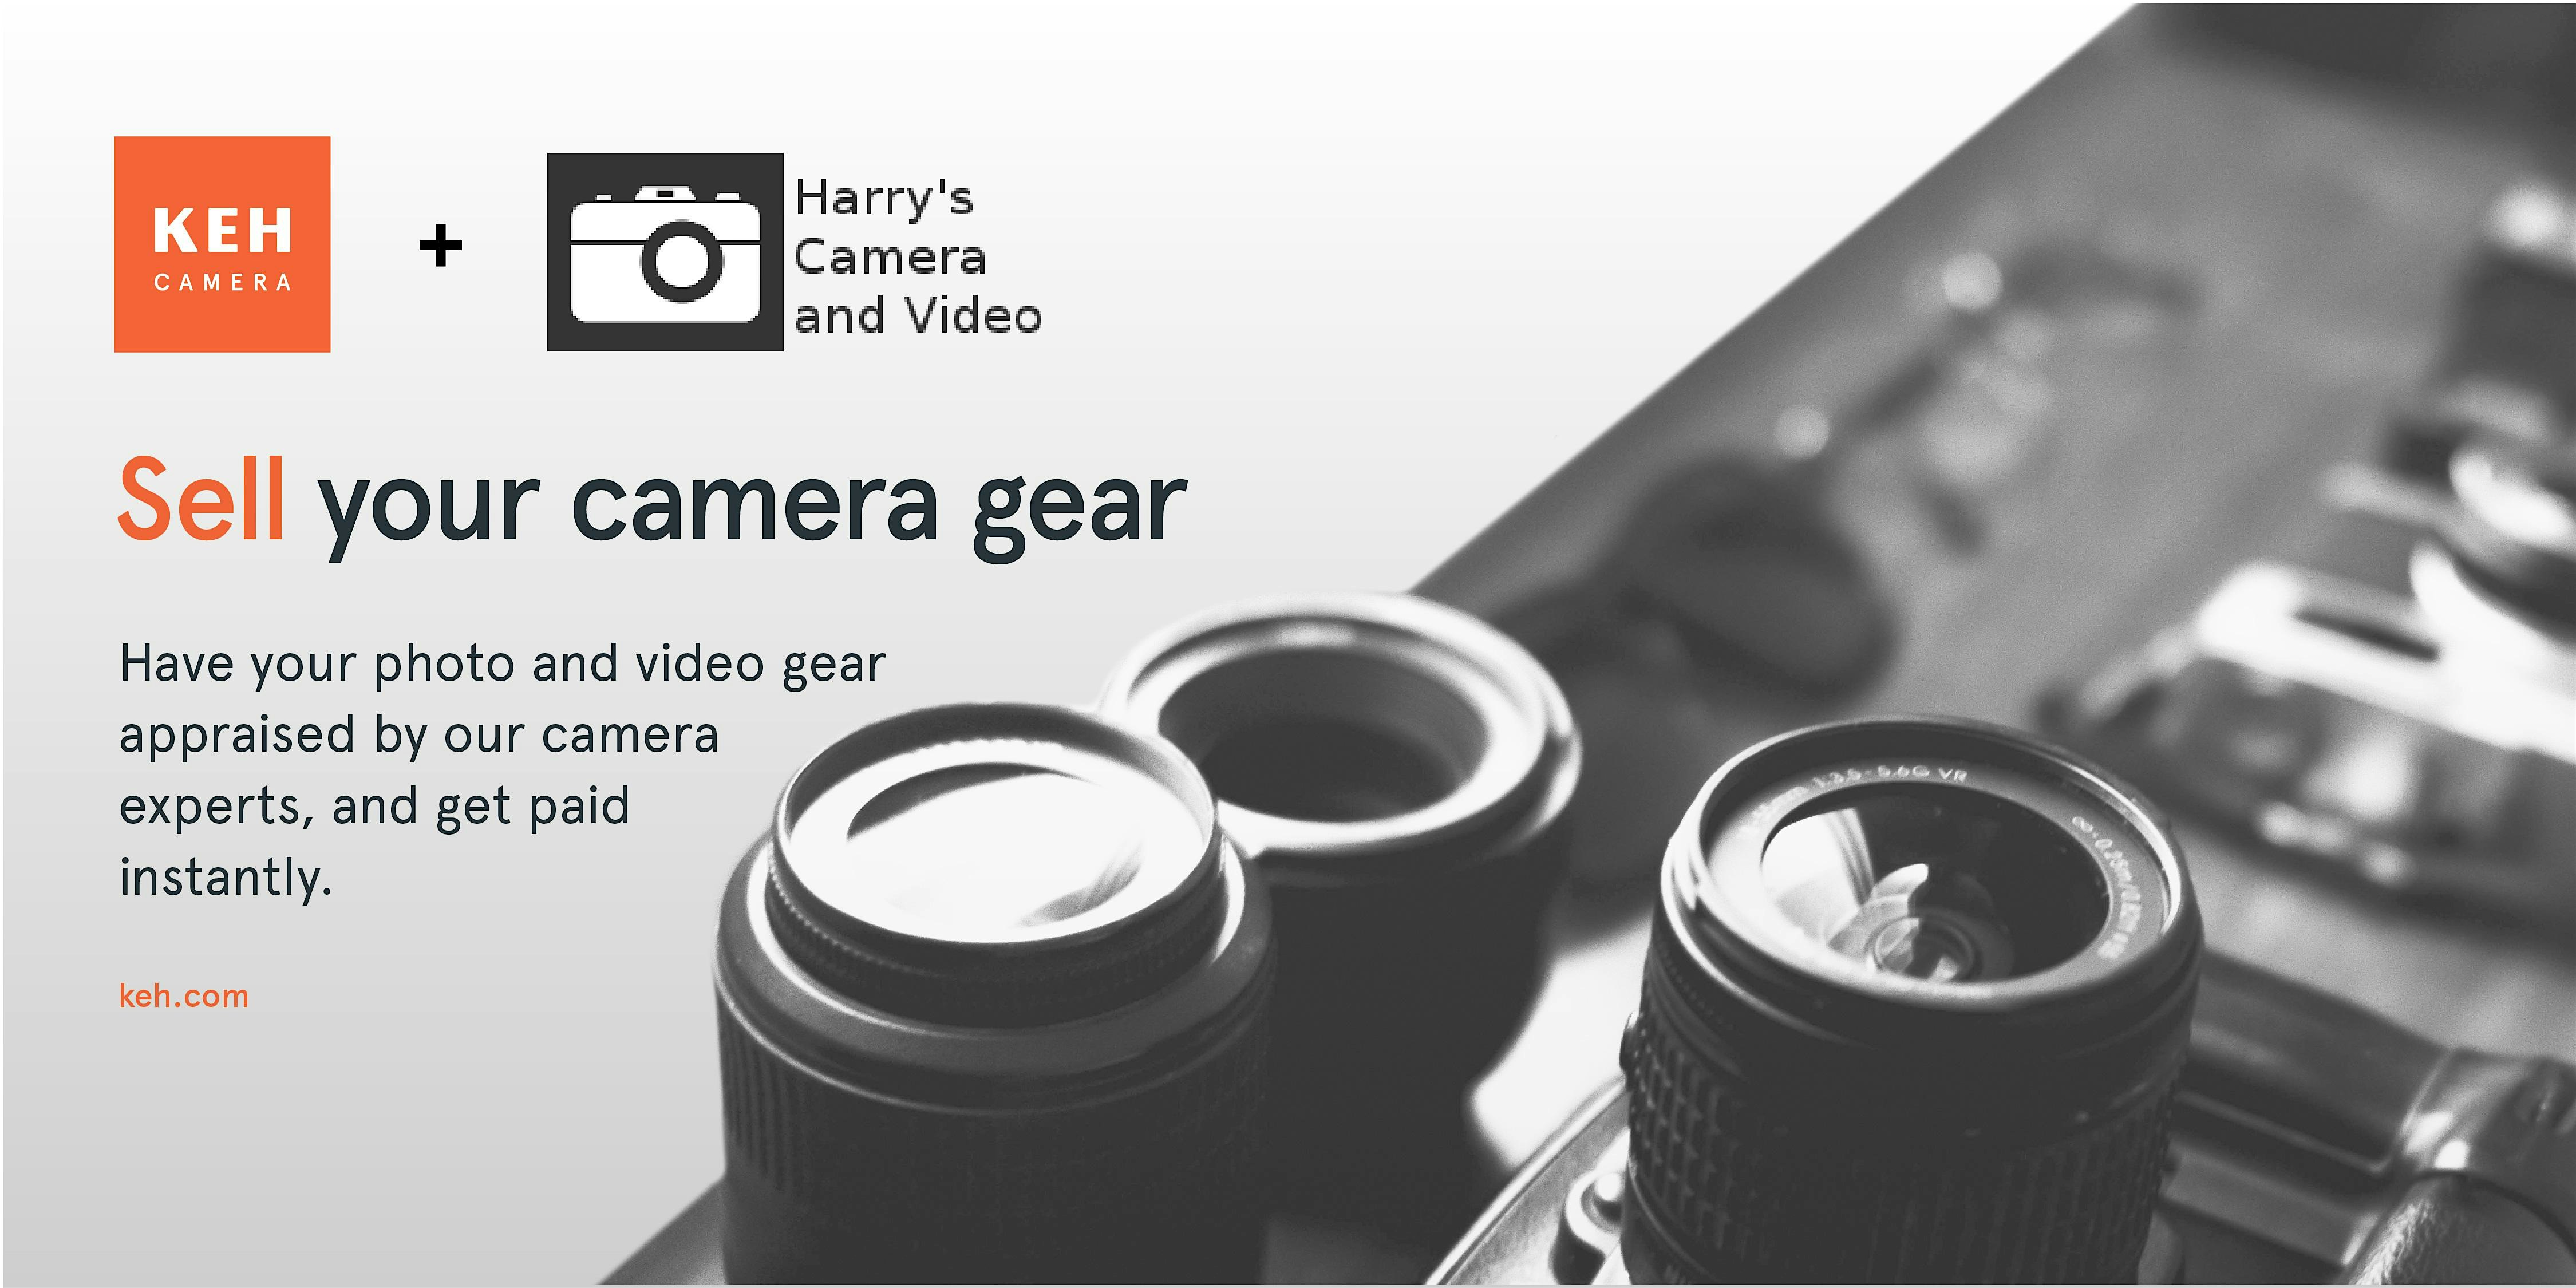 Sell your camera gear (free event) at Harry's Camera & Video